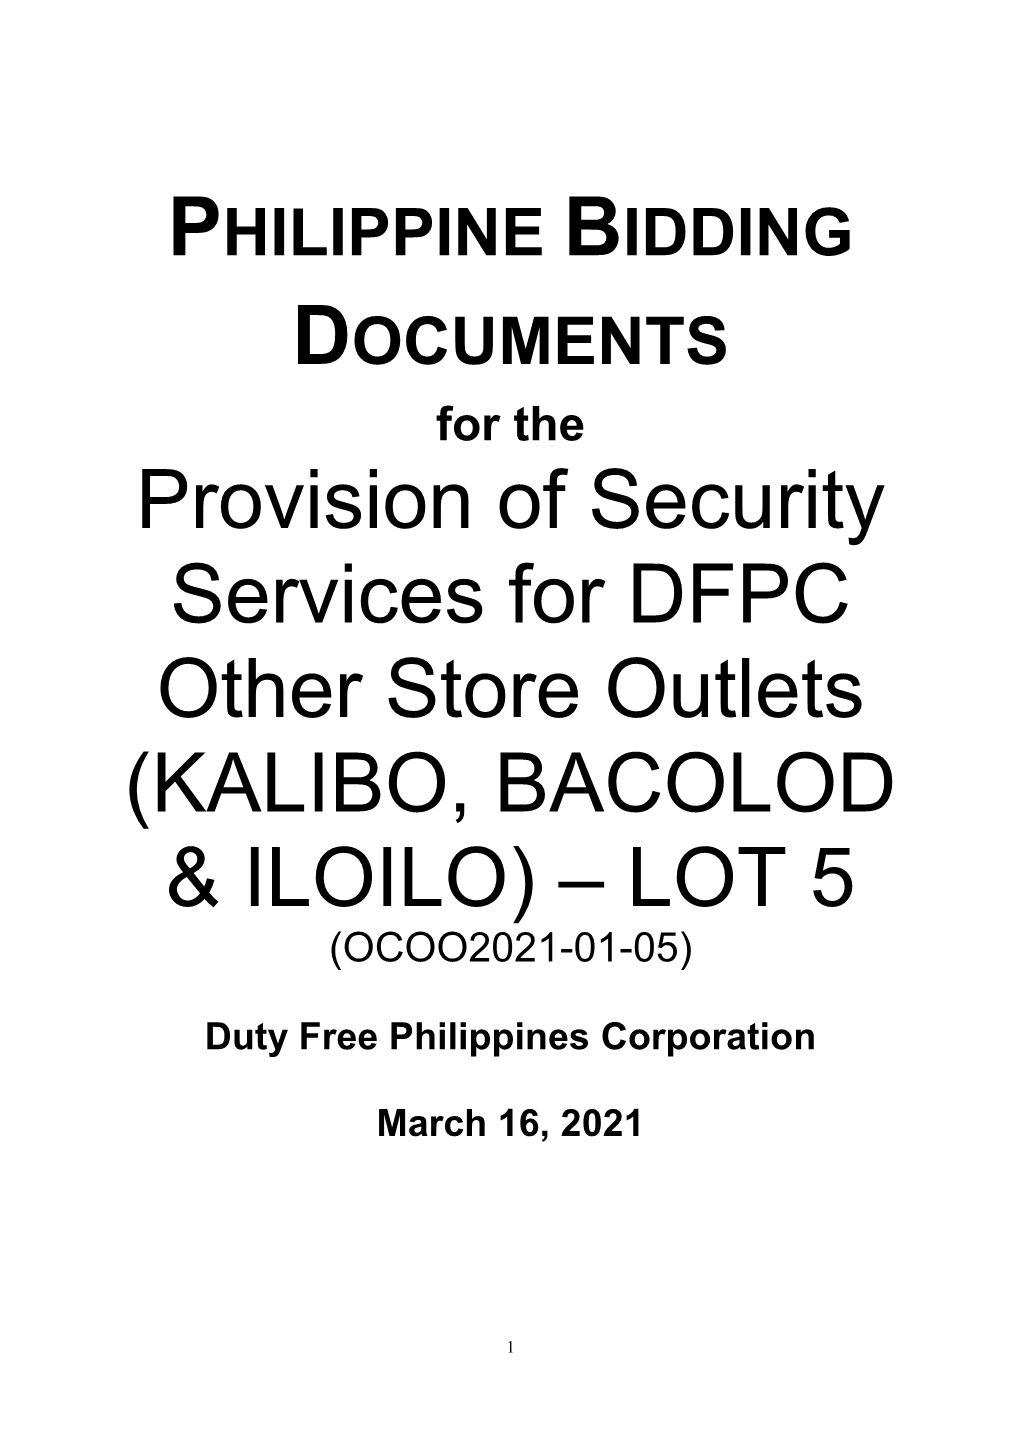 Provision of Security Services for DFPC Other Store Outlets (KALIBO, BACOLOD & ILOILO) – LOT 5 (OCOO2021-01-05)